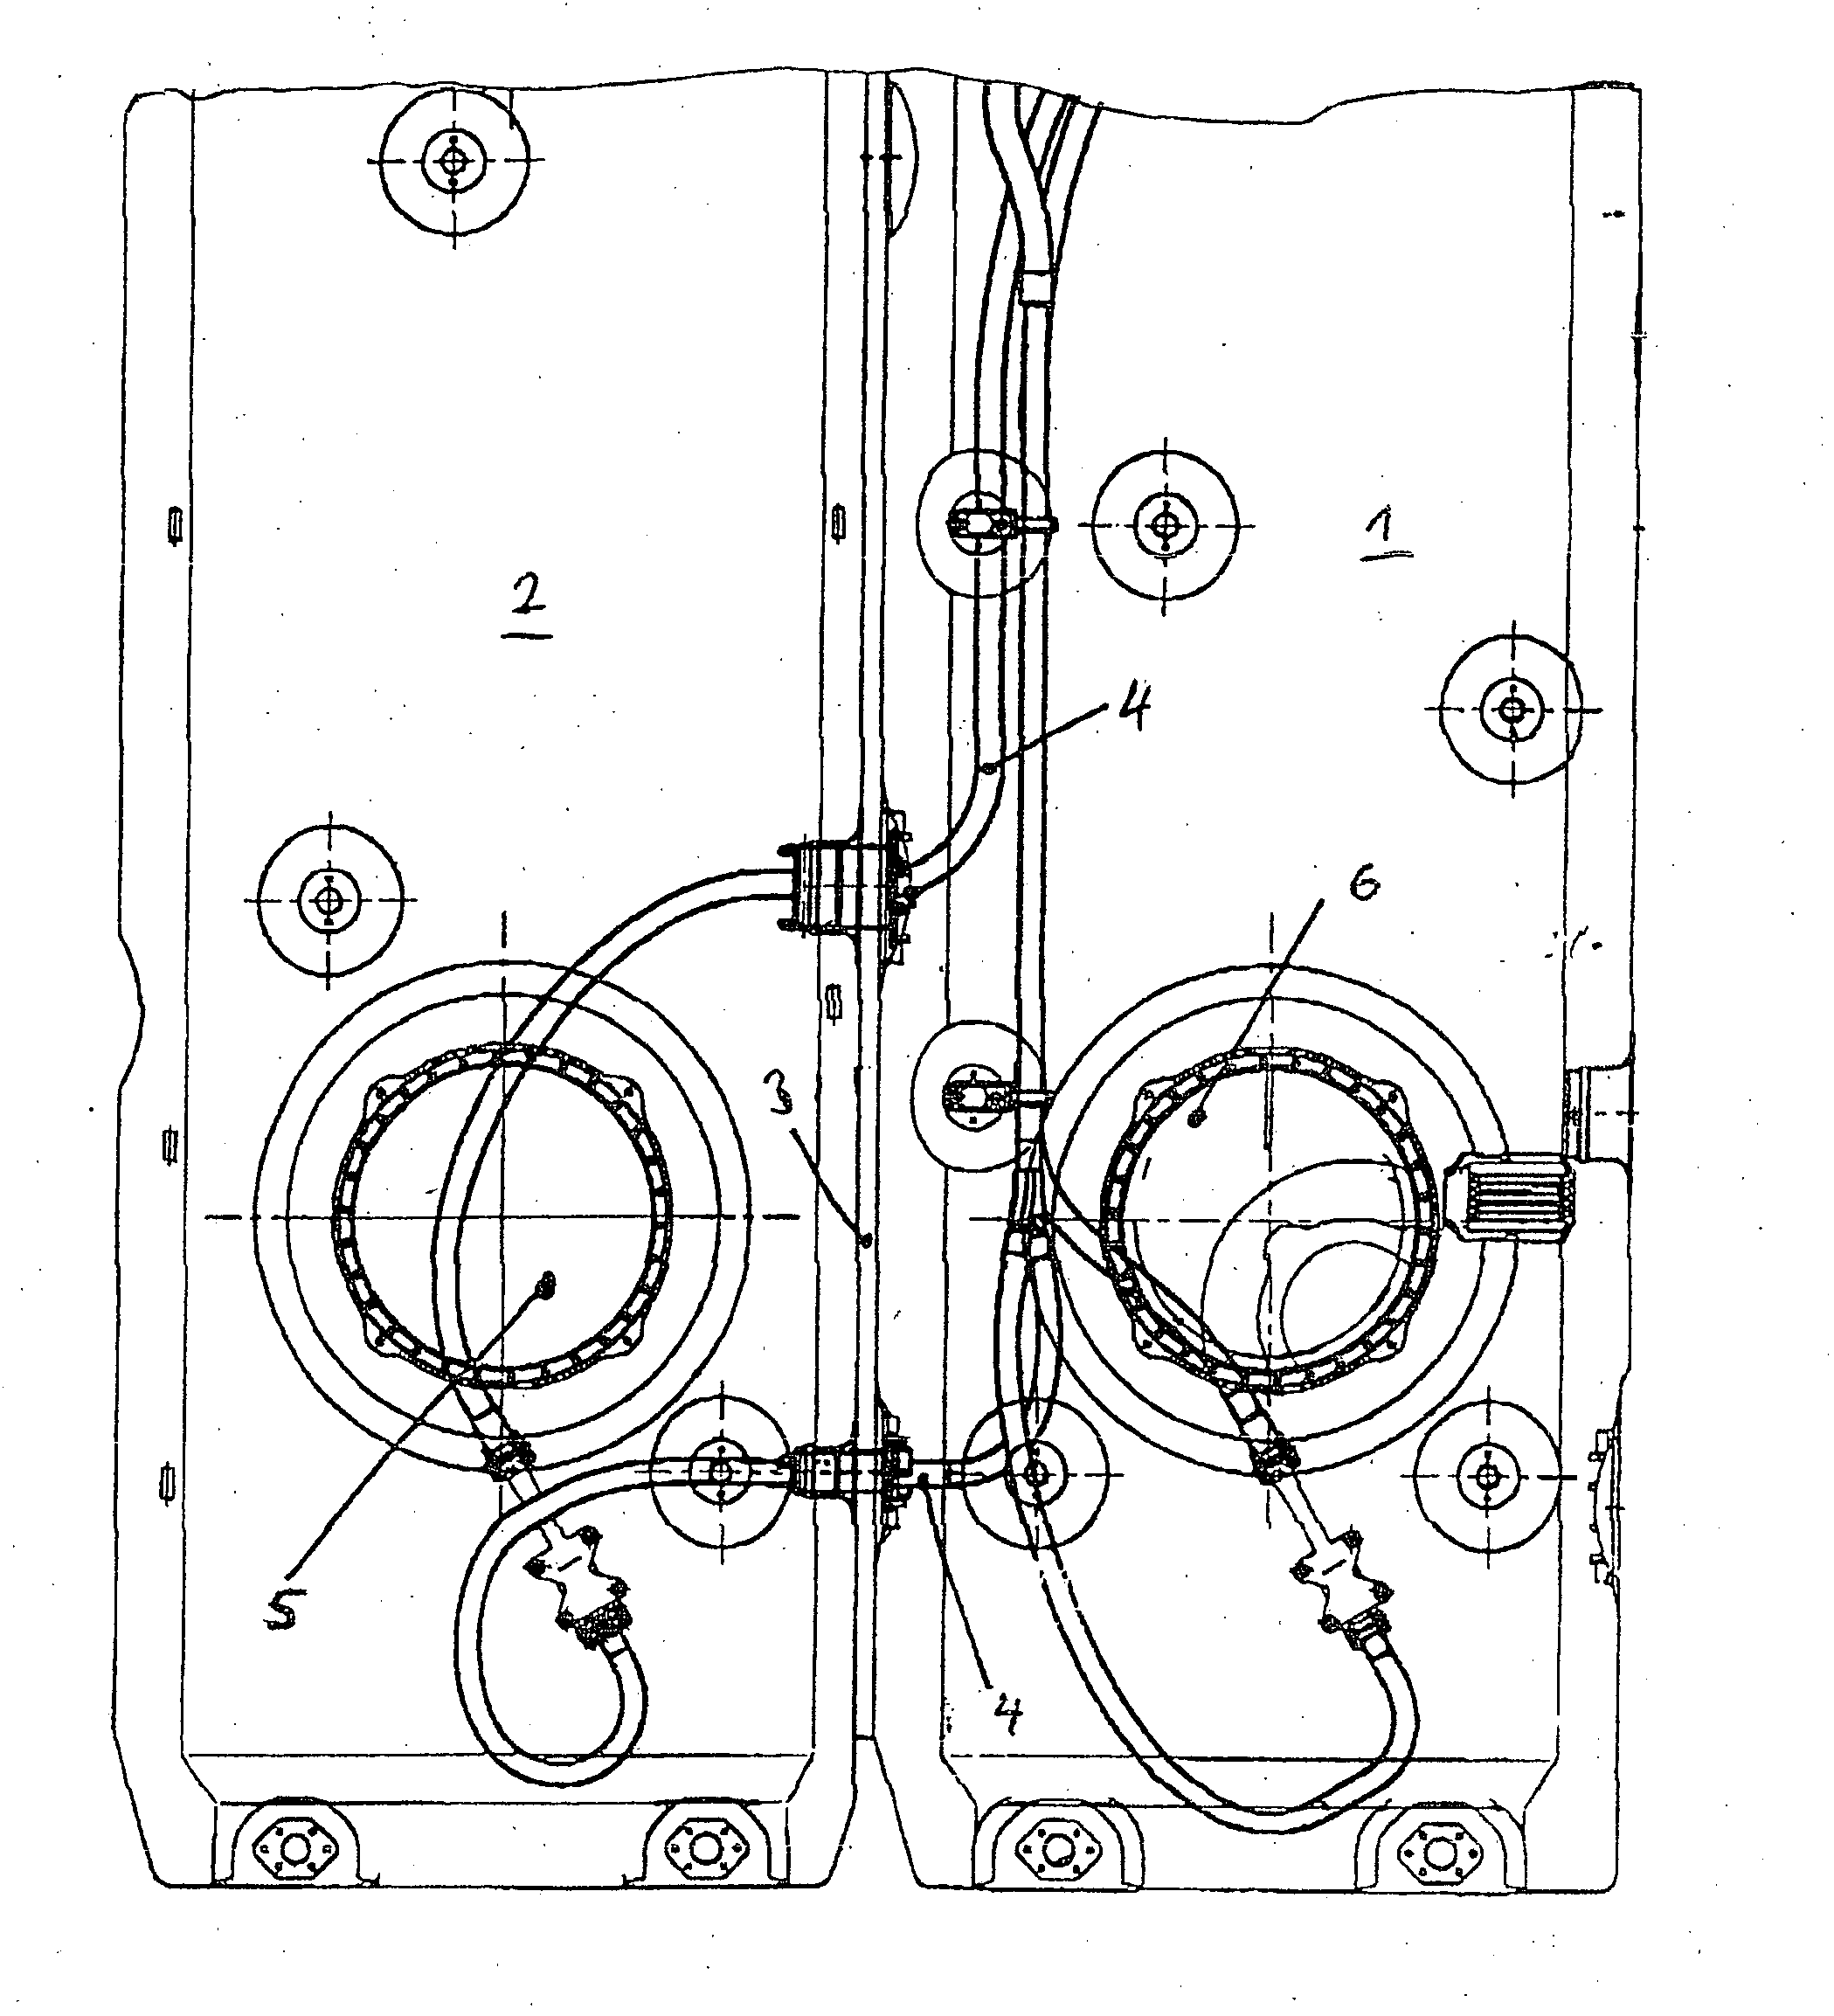 Connection arrangement to connect two flexible tanks of an aircraft